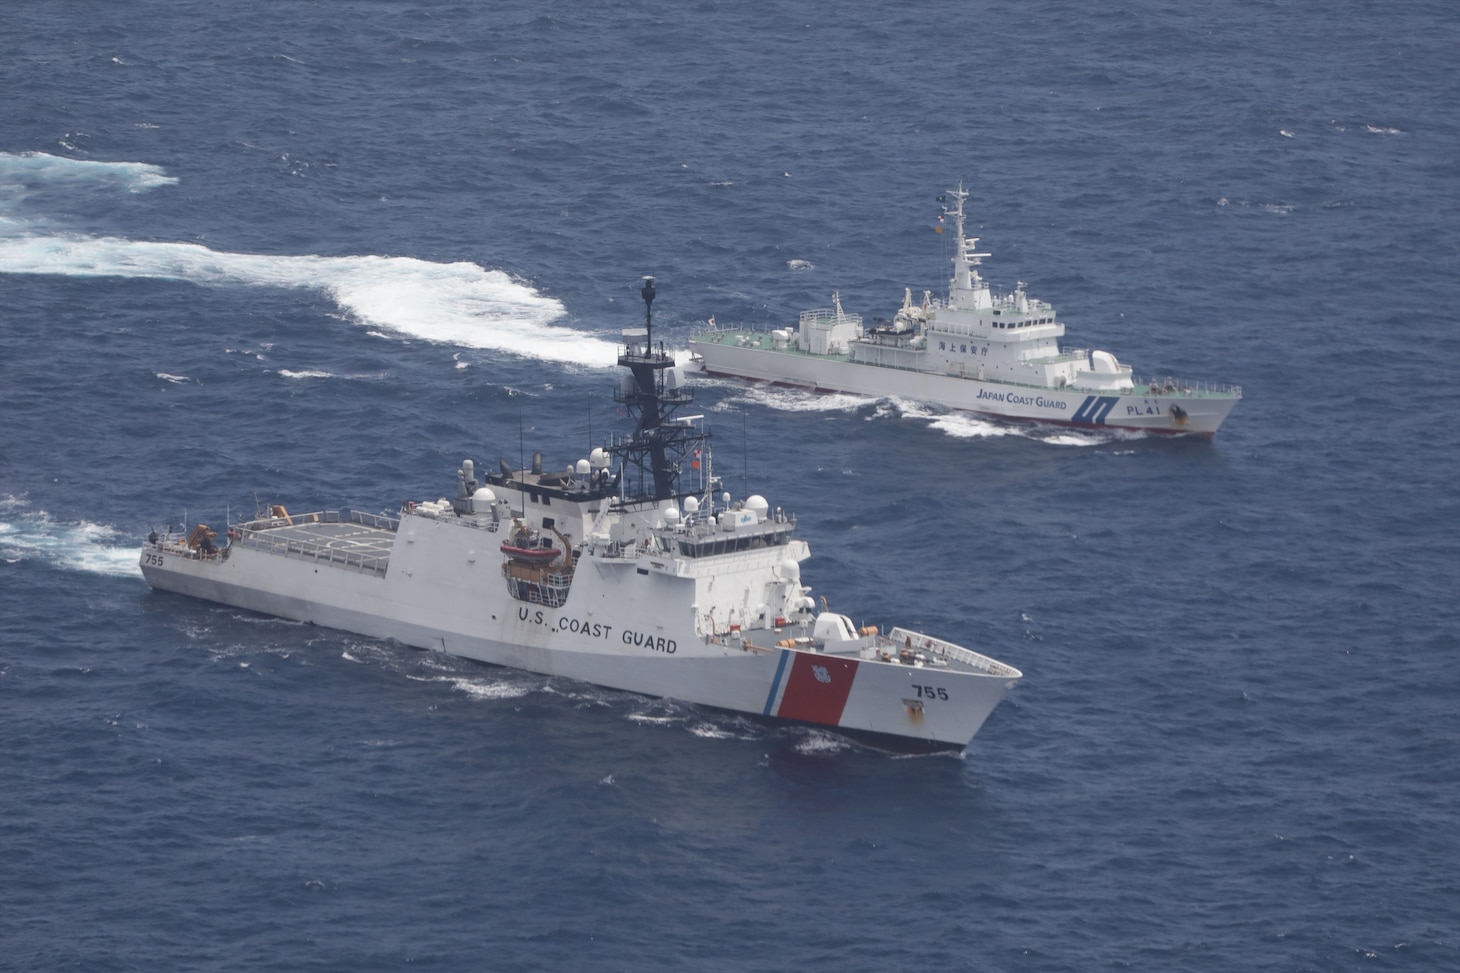 210826-N-MM501-1001 U.S. Coast Guard Cutter Munro and Japan Coast Guard Patrol Vessel Large Aso, transit together in formation during a maritime engagement in the East China Sea Aug. 25, 2021. U.S. Coast Guard members aboard the Munro deployed to the Western Pacific Ocean to strengthen alliances and partnerships and improve maritime governance and security in the region. (Photo courtesy of Japan Coast Guard)